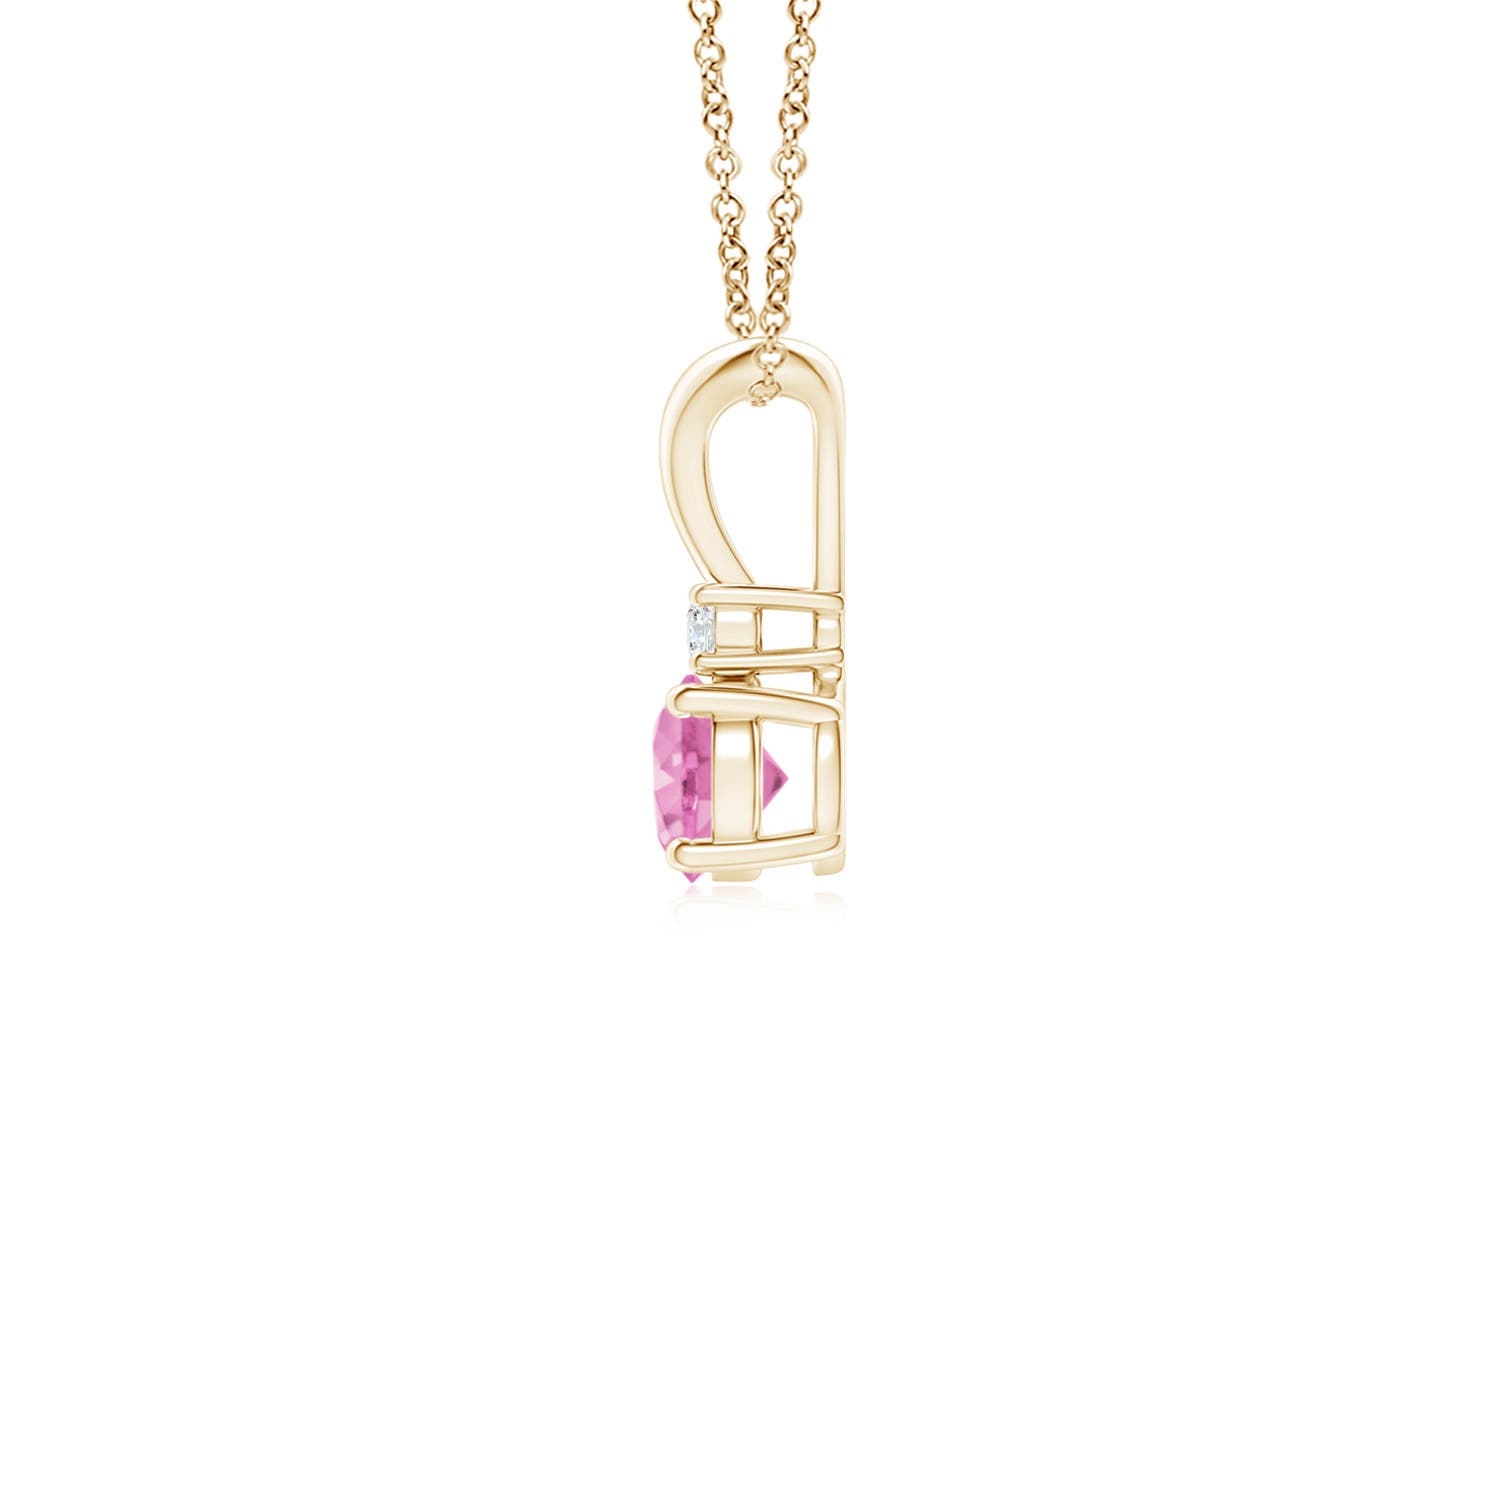 A - Pink Sapphire / 0.34 CT / 14 KT Yellow Gold